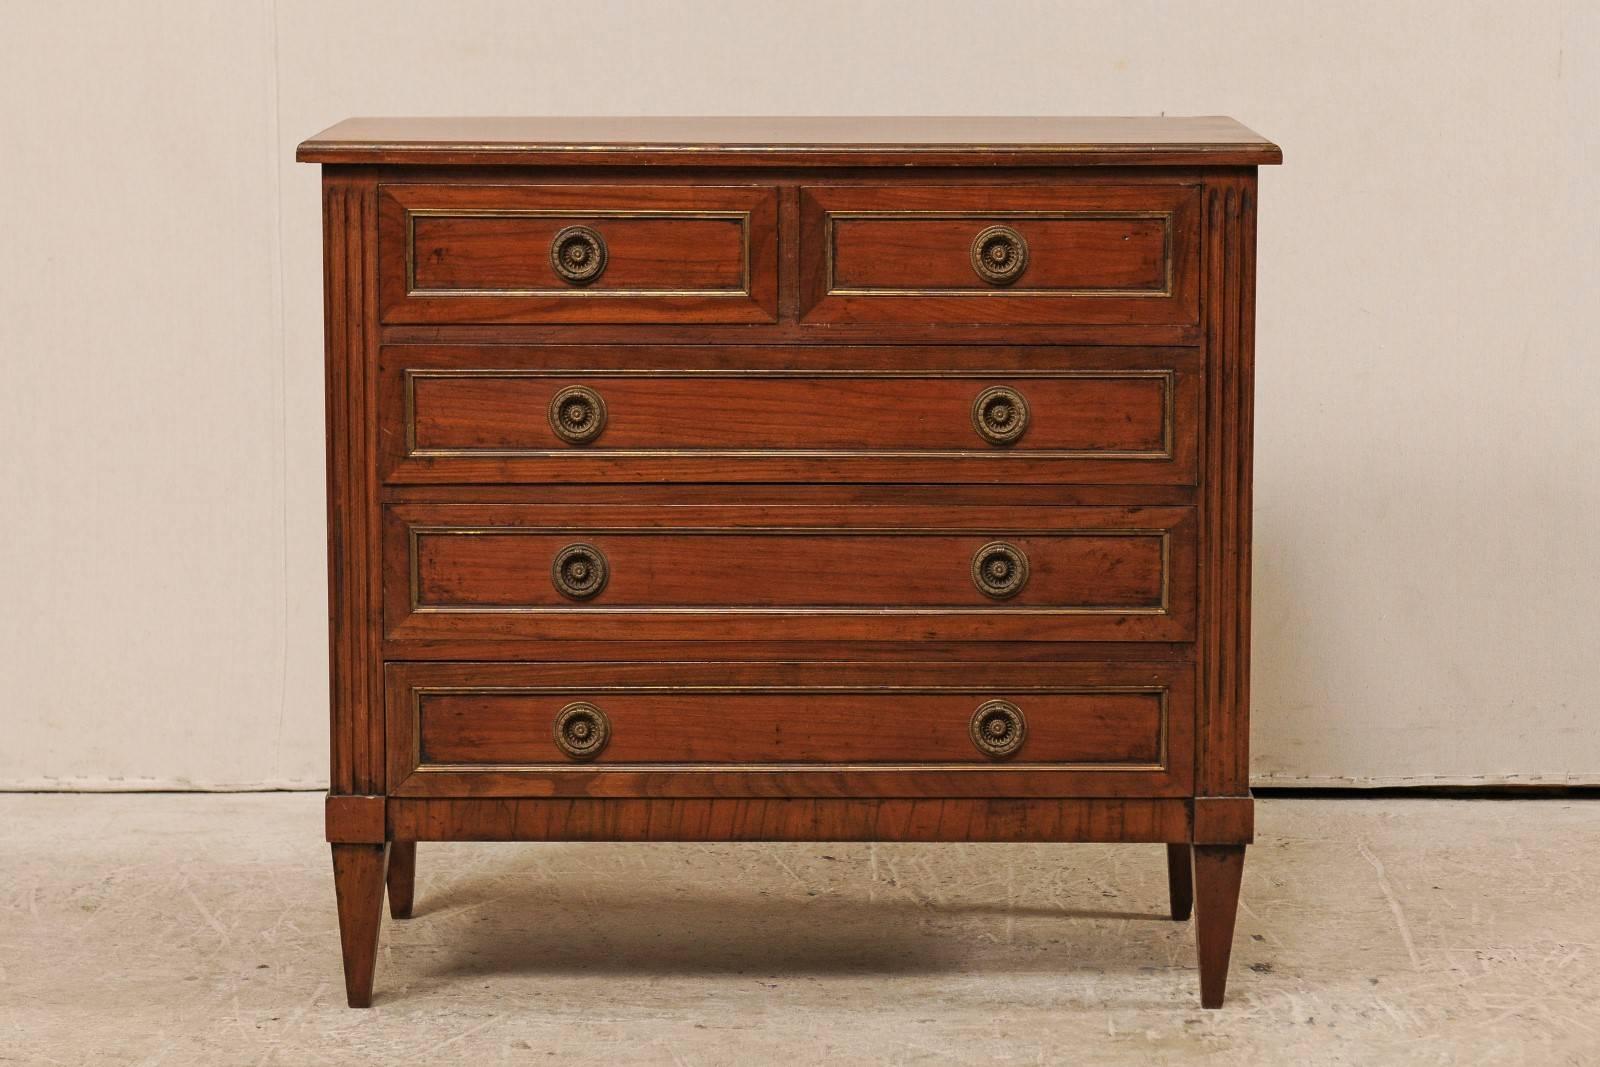 A vintage French wood five-drawer dresser. This antique French dresser features two half drawers over three longer drawers. Each drawer has beautiful metal trimming and are adorn with a wreathed ring pull, with a single flower at their centers.